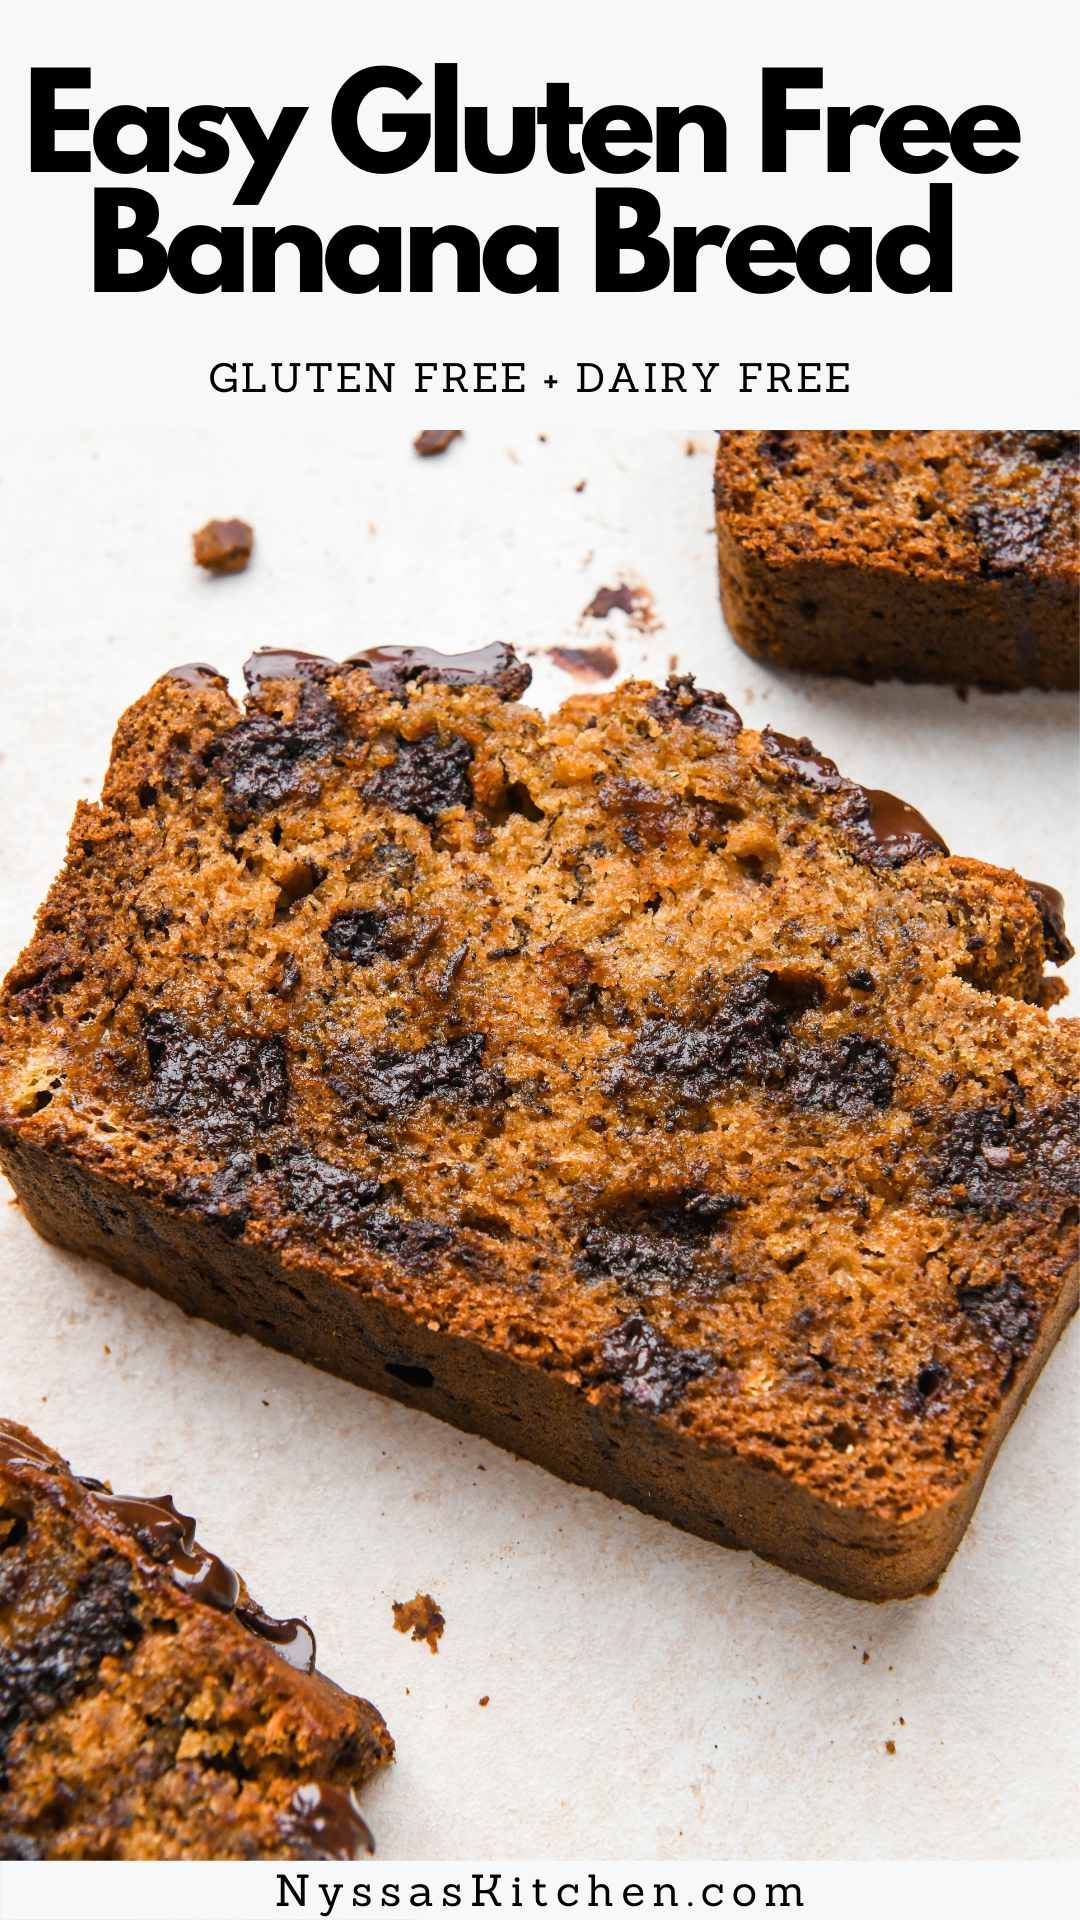 This easy gluten free banana bread is moist, healthy, and just as delicious as regular banana bread! Made with simple, clean ingredients, chocolate chips, and all purpose gluten free flour for a recipe you'll come back to again and again. Perfect for breakfast or a mid day snack! Gluten free, dairy free, and naturally sweetened.